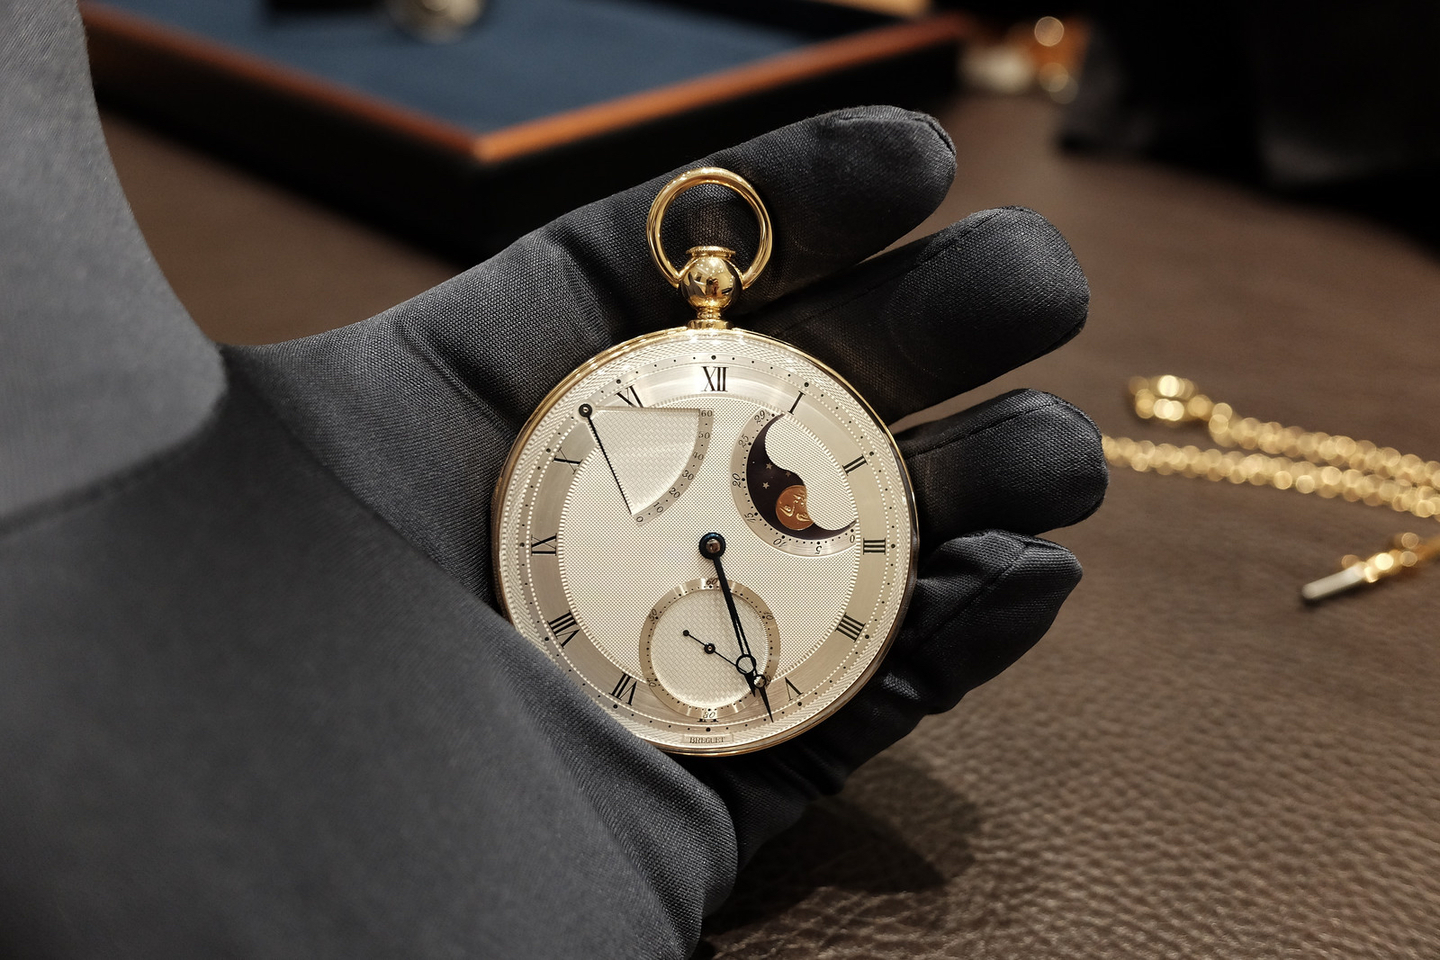 Is the Breguet No. 5 Pocket Watch worth its asking price?